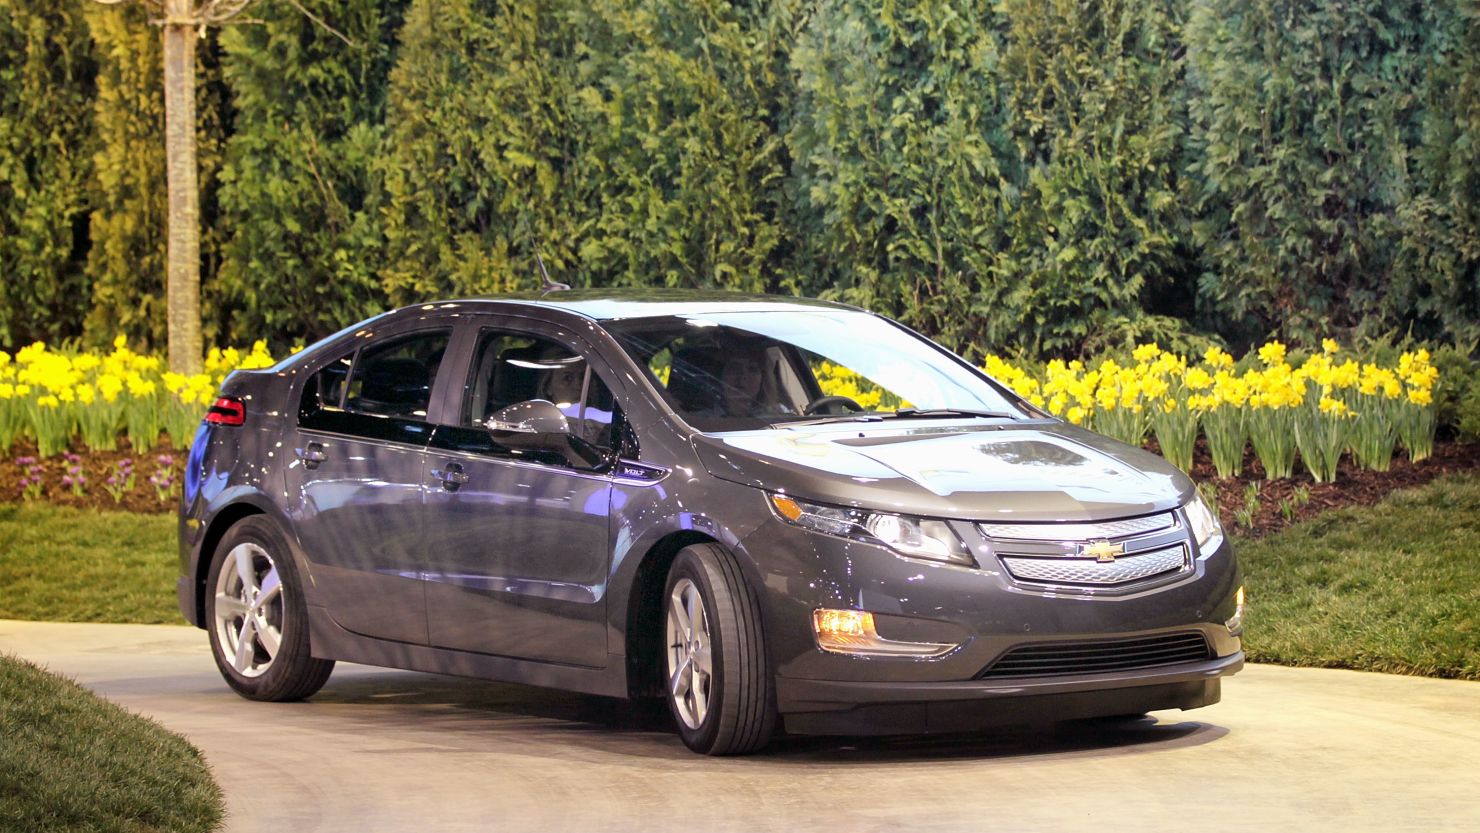 The Chevy Volt passed other safety administration tests, earning a five-star rating for overall safety.